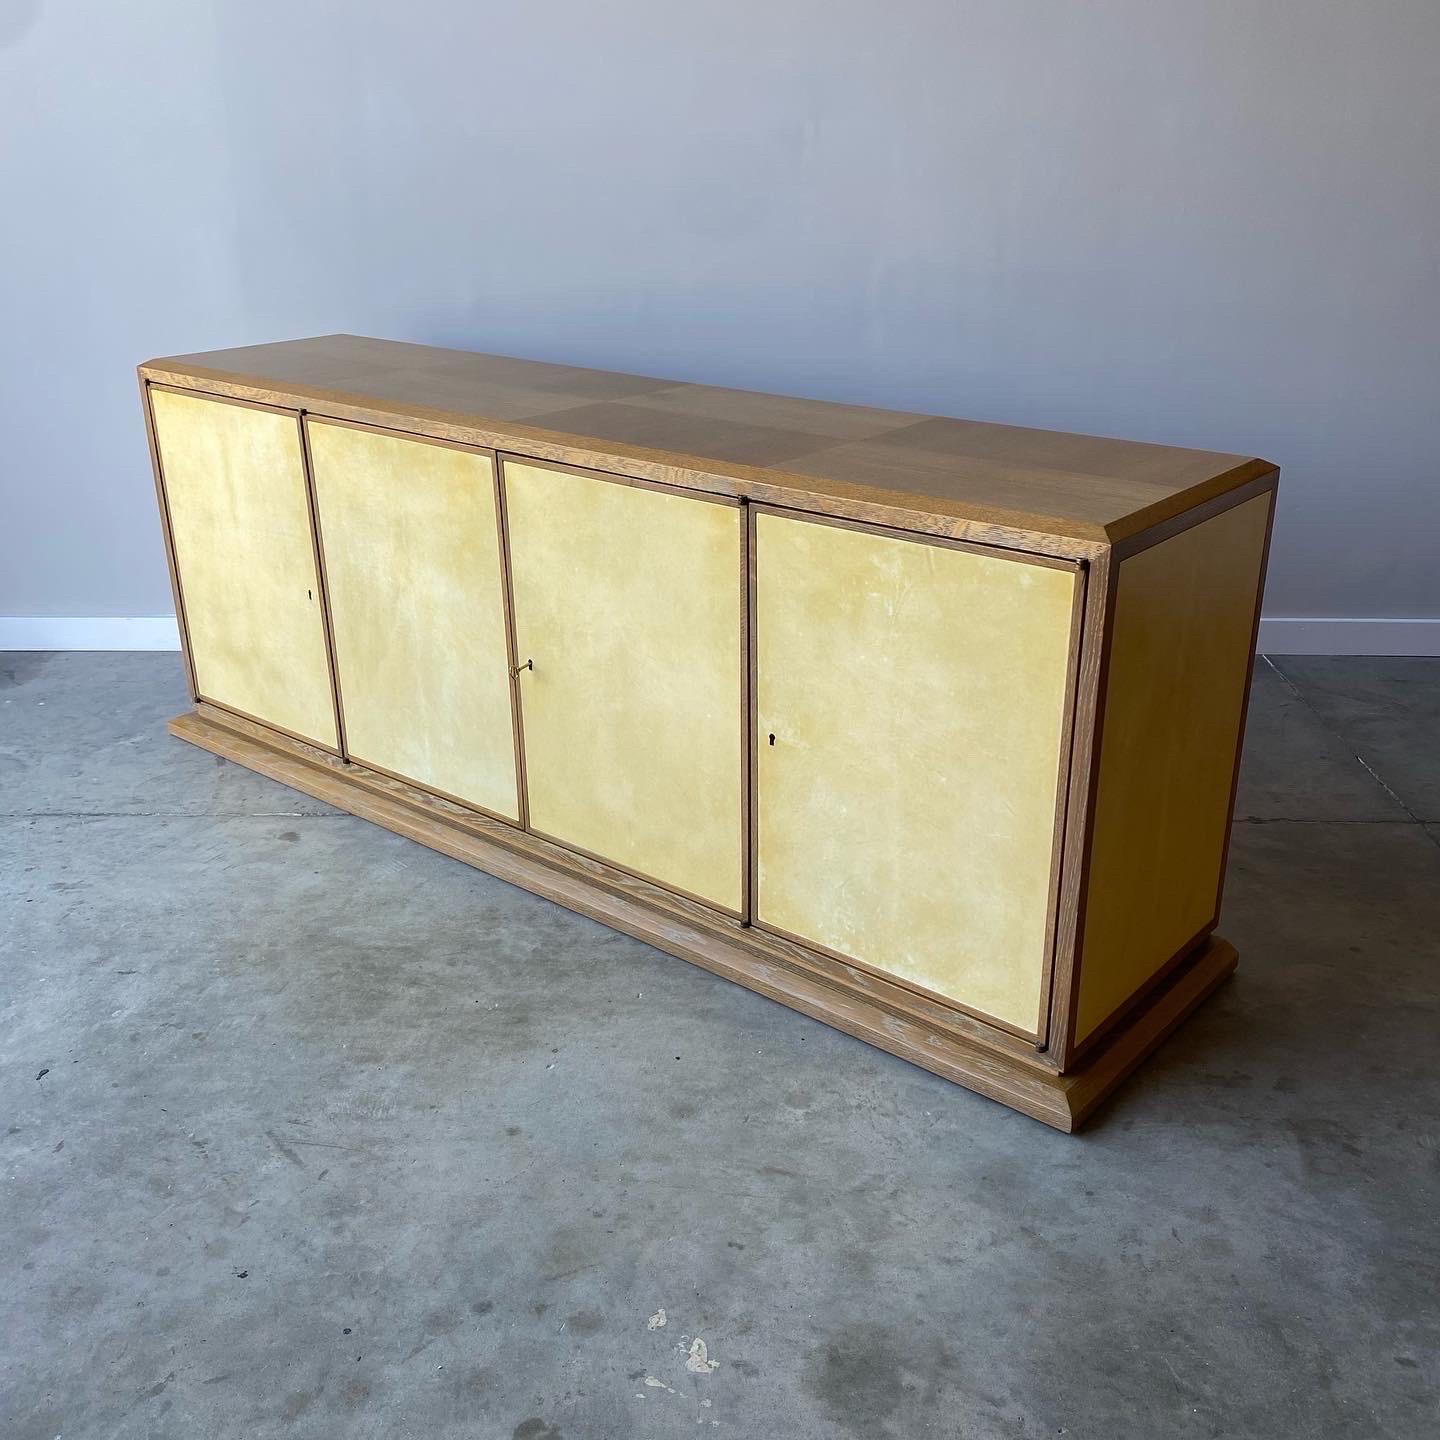 White oak and goatskin are the highlights to this massive credenza. The oak has a beautiful cerused finish with goatskin parchment panel inserts. This cabinet looks to be a Tommi Parzinger design for Charak Modern but is unmarked

This piece dates